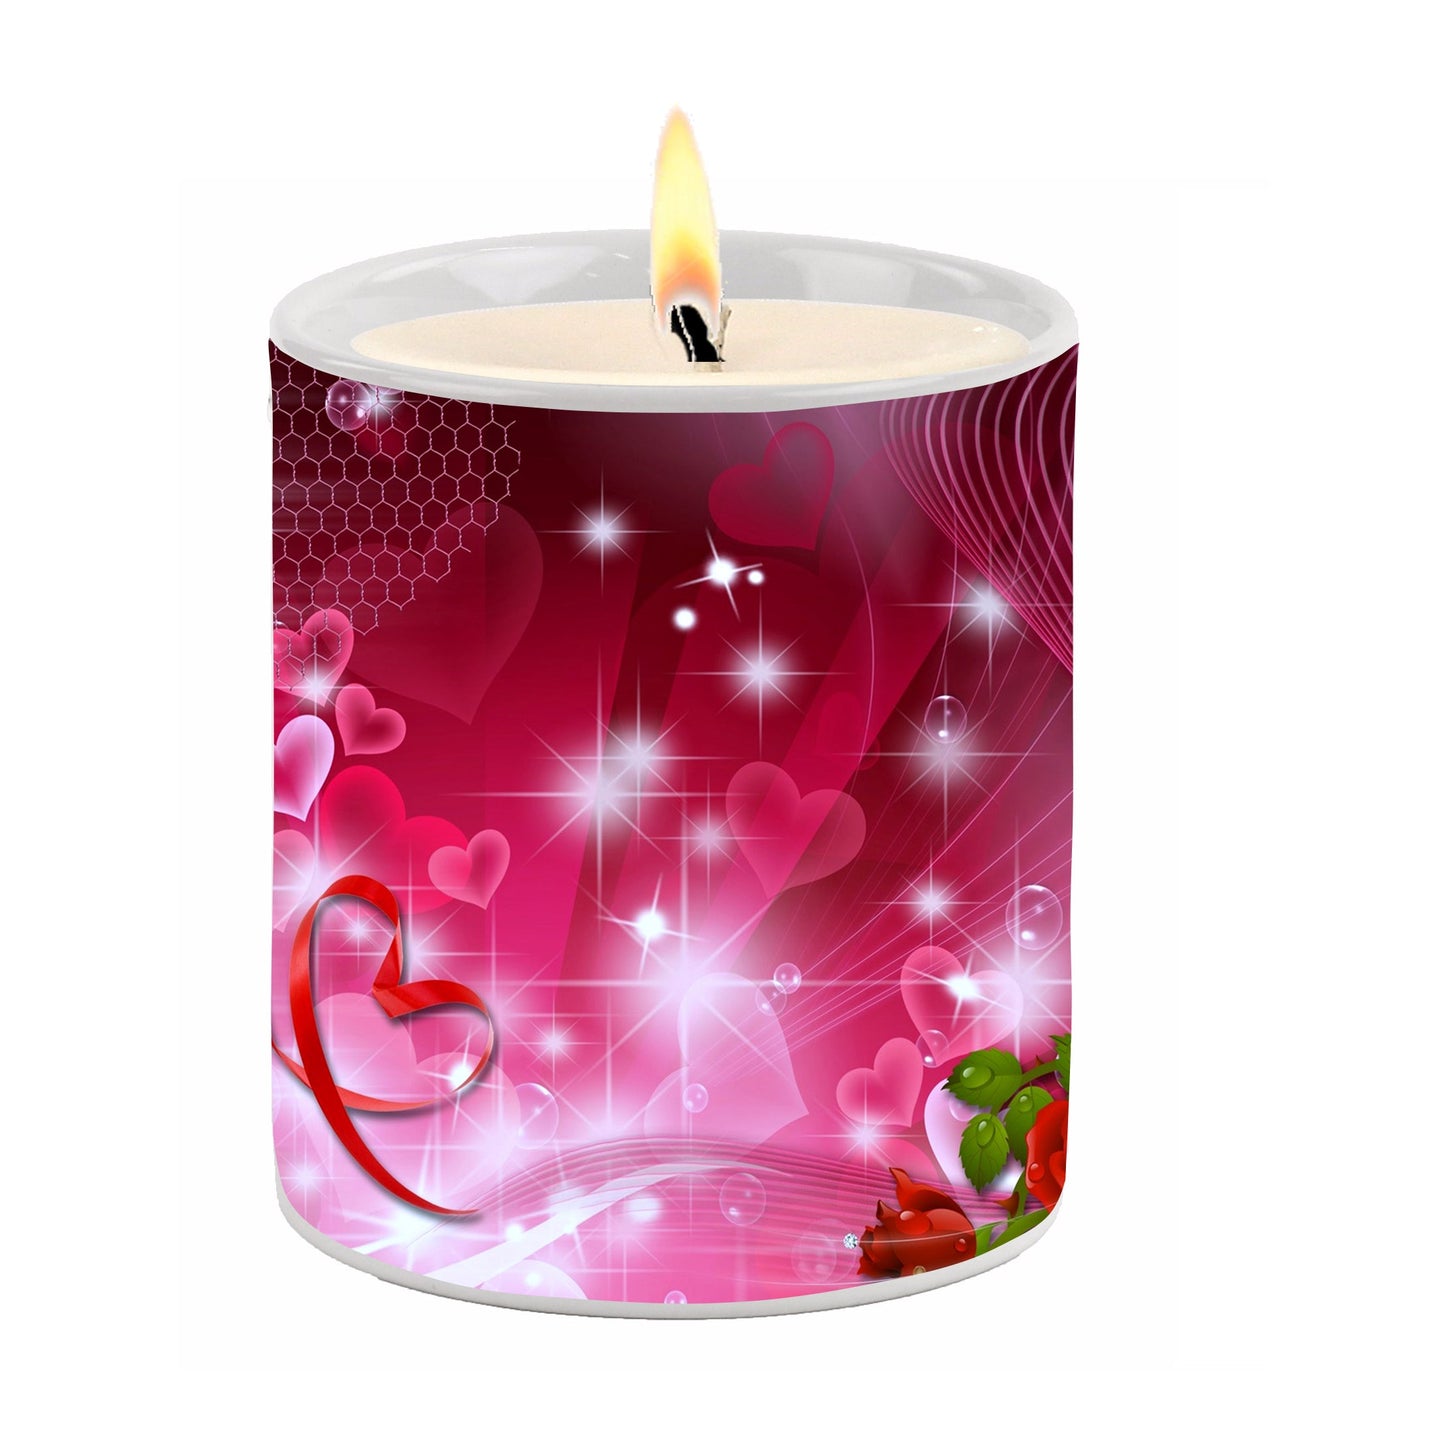 SUBLIMART: Love - Soy Wax Candle (Design #VAL01)